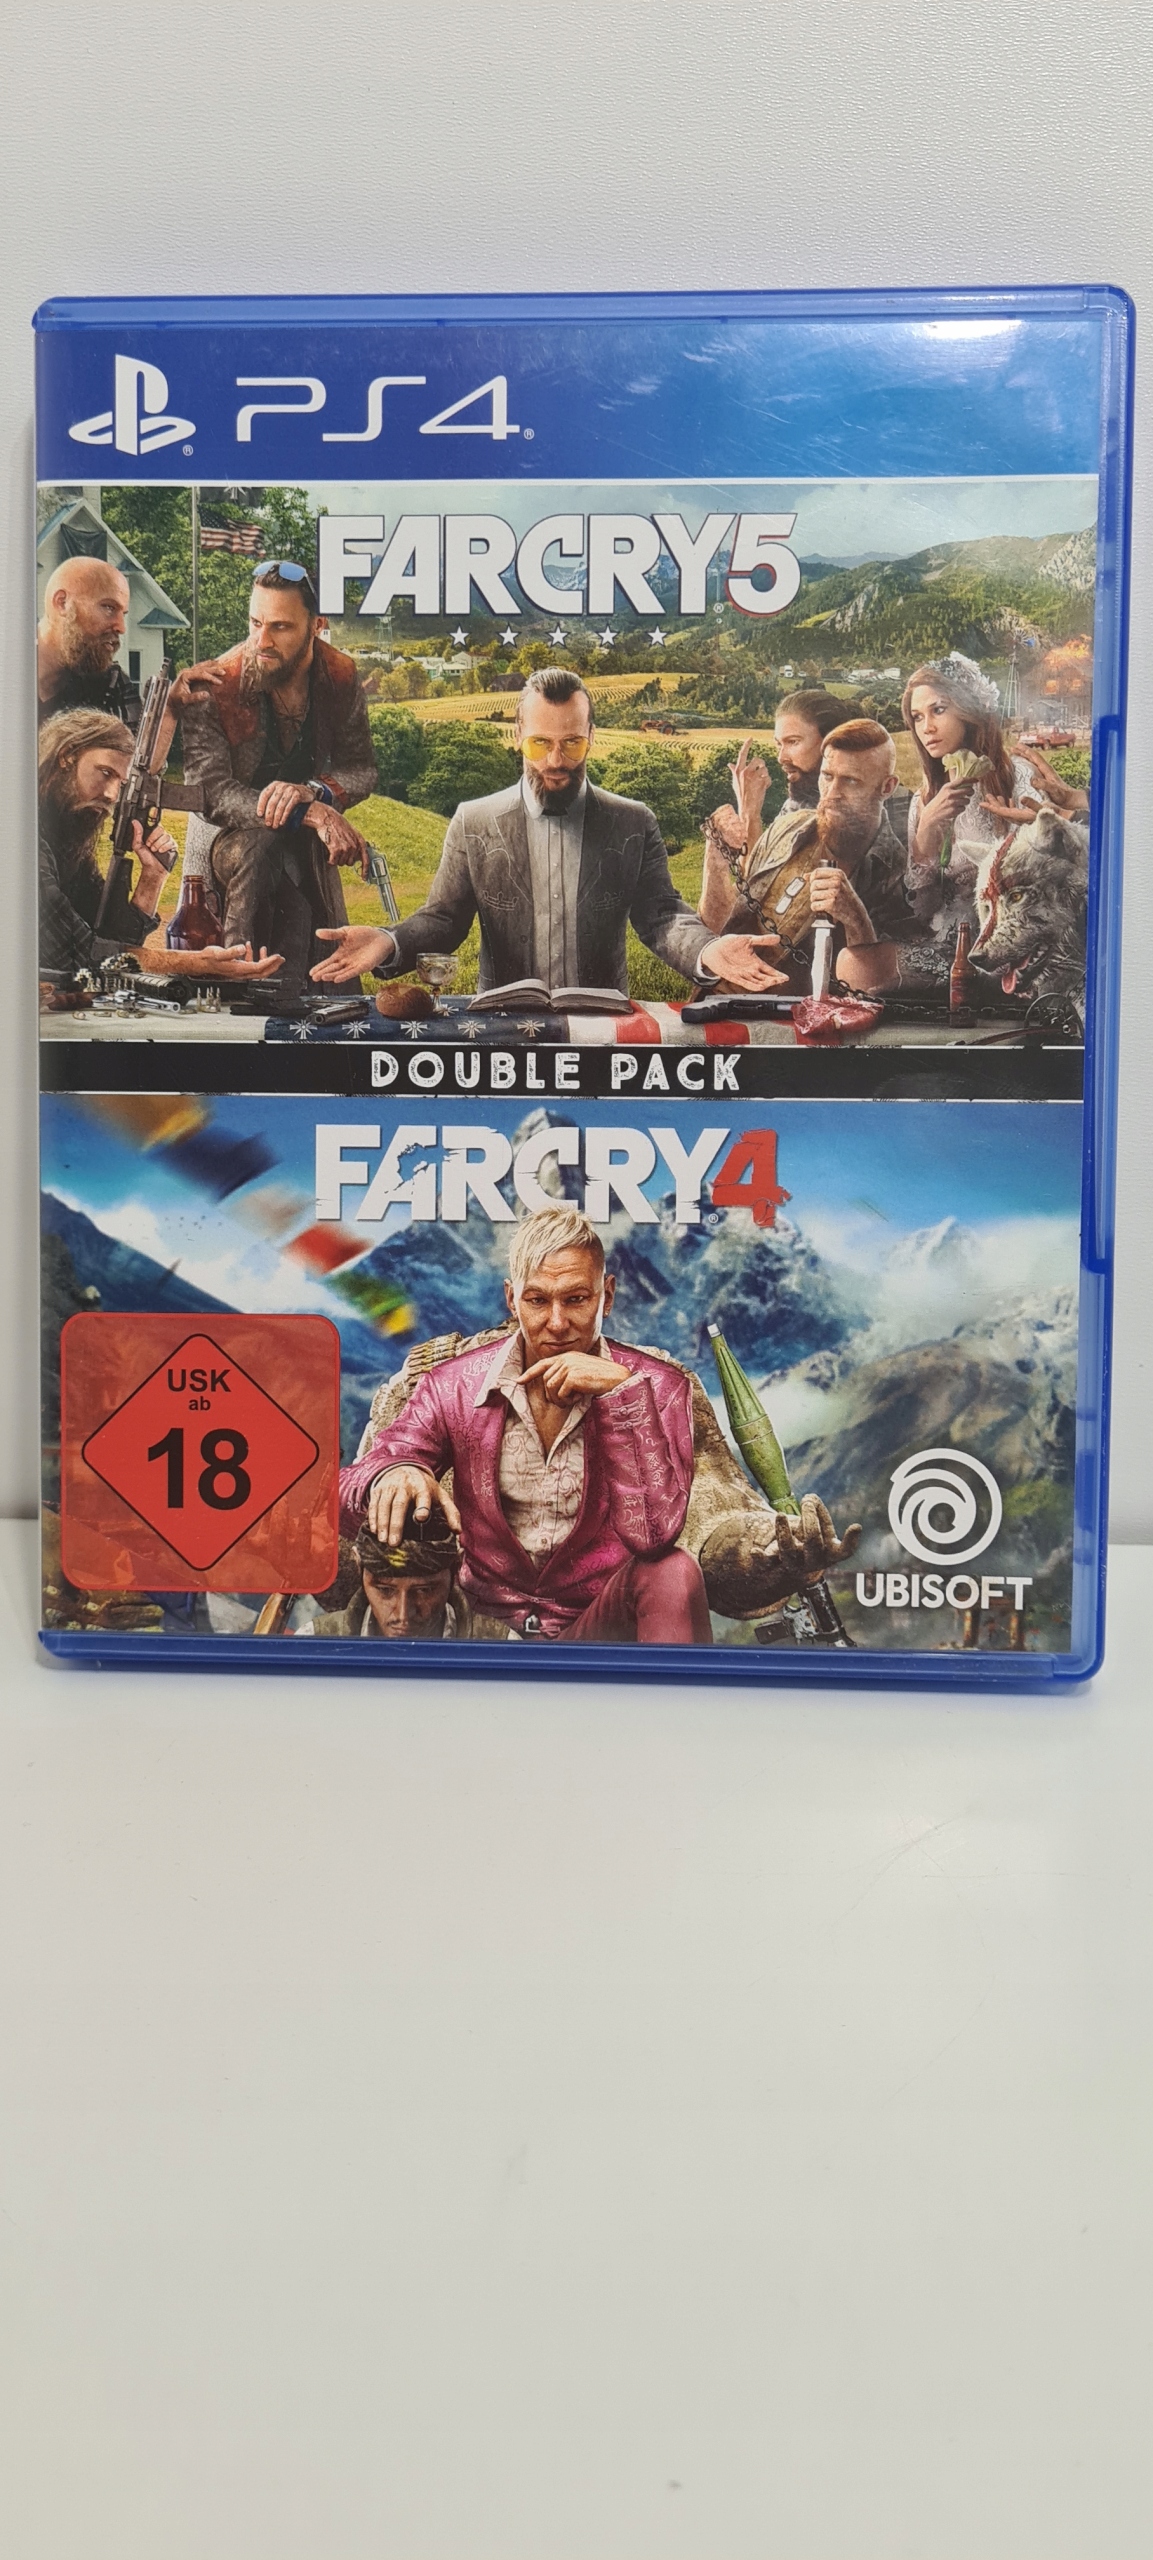 Far Cry 4 + Far Cry 5 Double Pack - Ps4